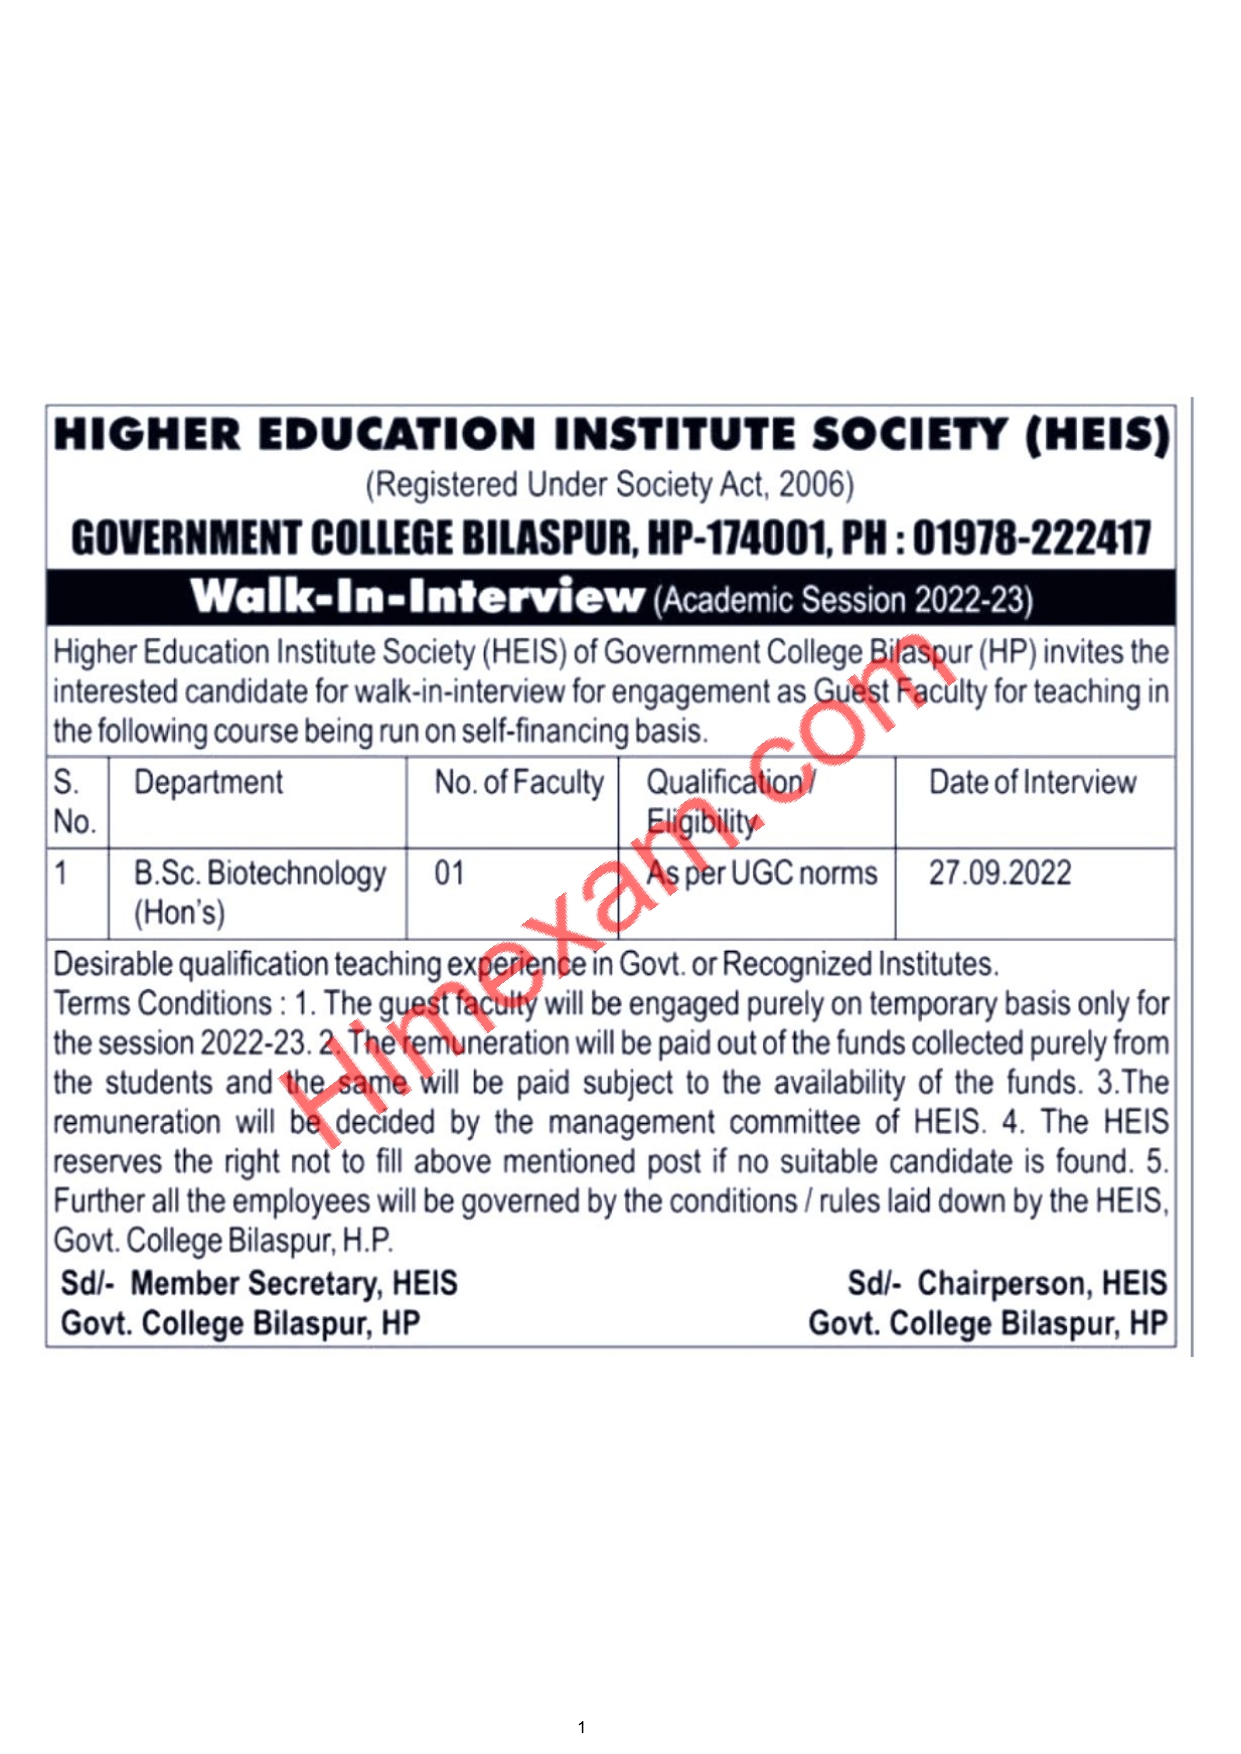 Government College Bilaspur (HP) Guest Faculty Recruitment 2022